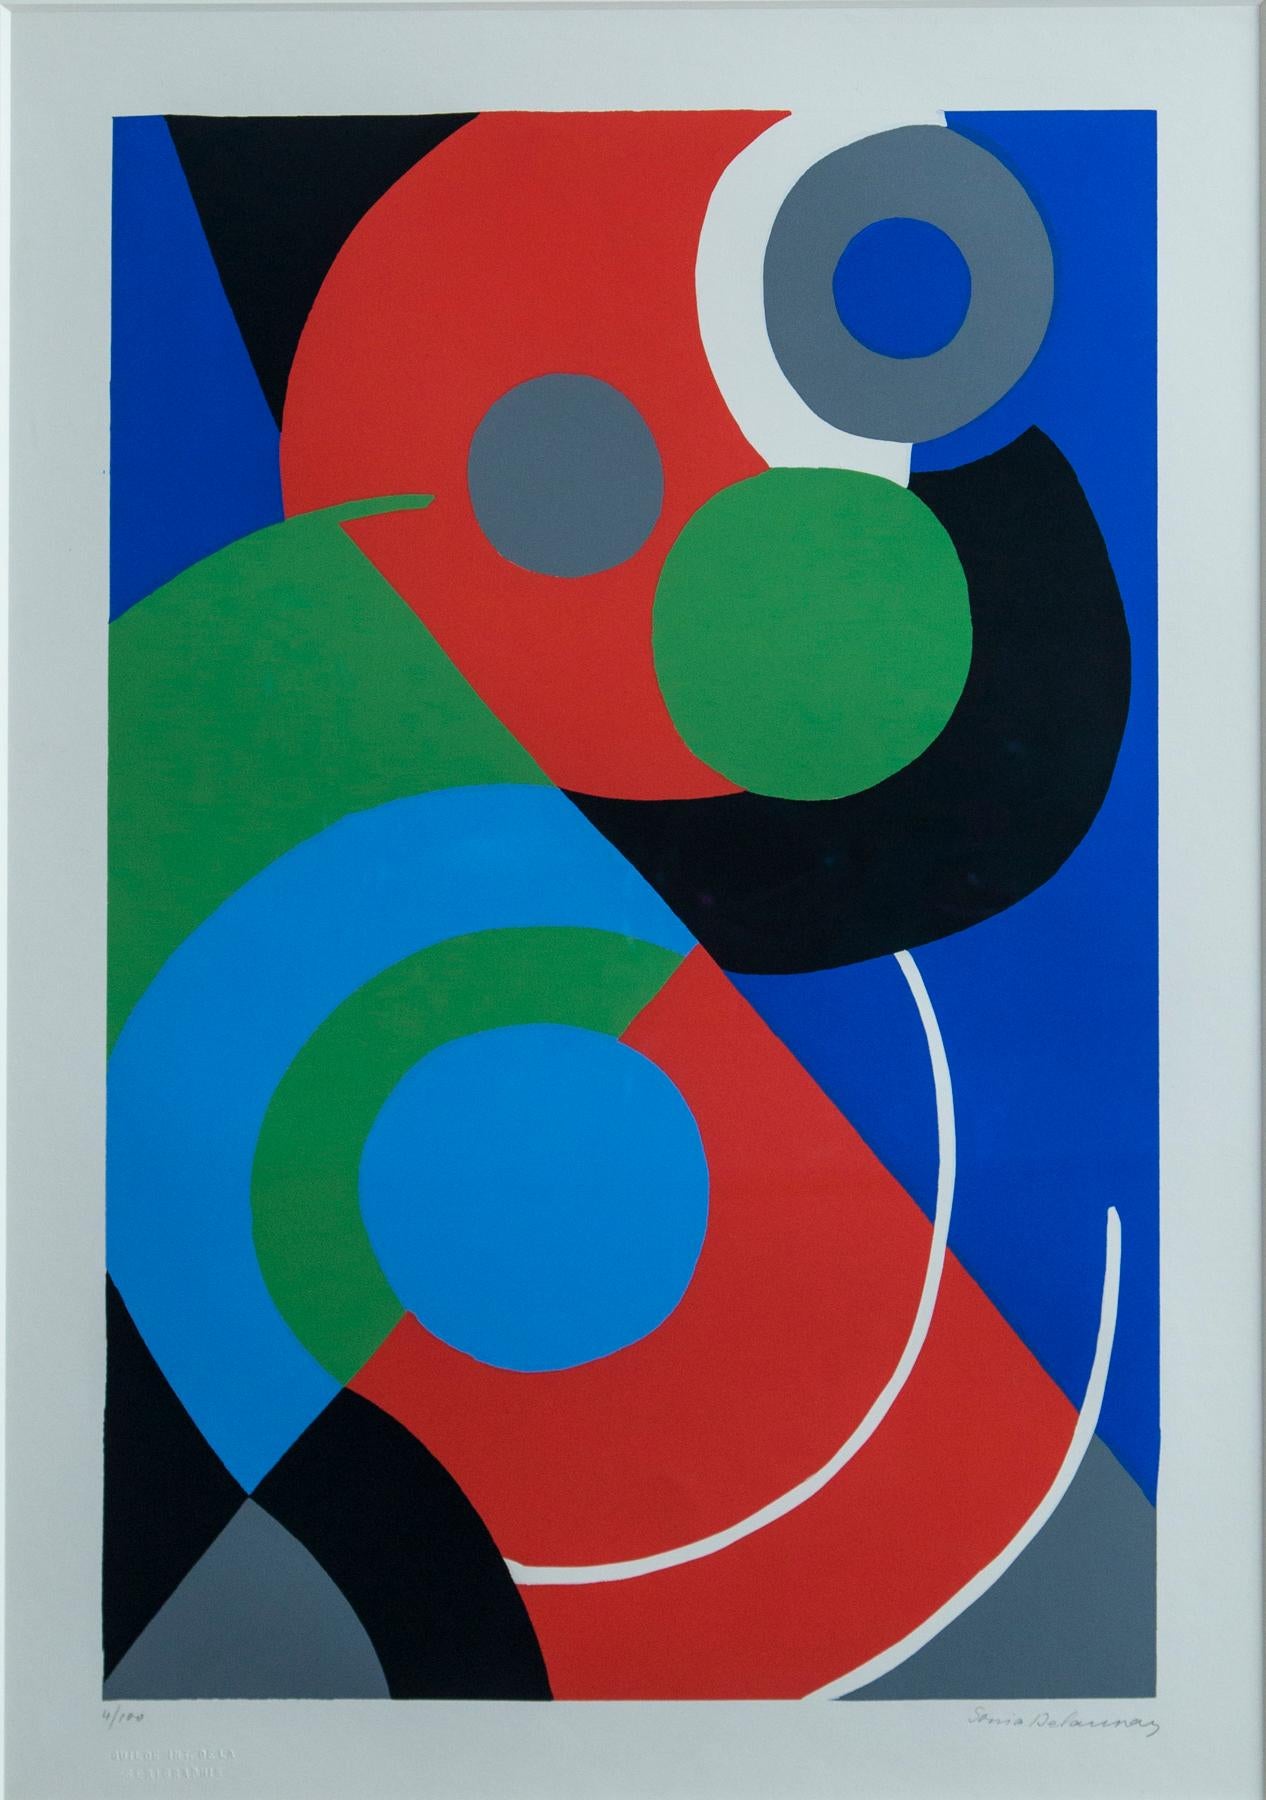 Sonia Delaunay Print, editioned 4/100. Signed lithograph. Newly framed with museum glass.

Sonia Delaunay was born in the Ukraine in 1885 and raised in St. Petersburg. After studying drawing at Karlsruhe under Schmidt-Reutter she came to Paris in